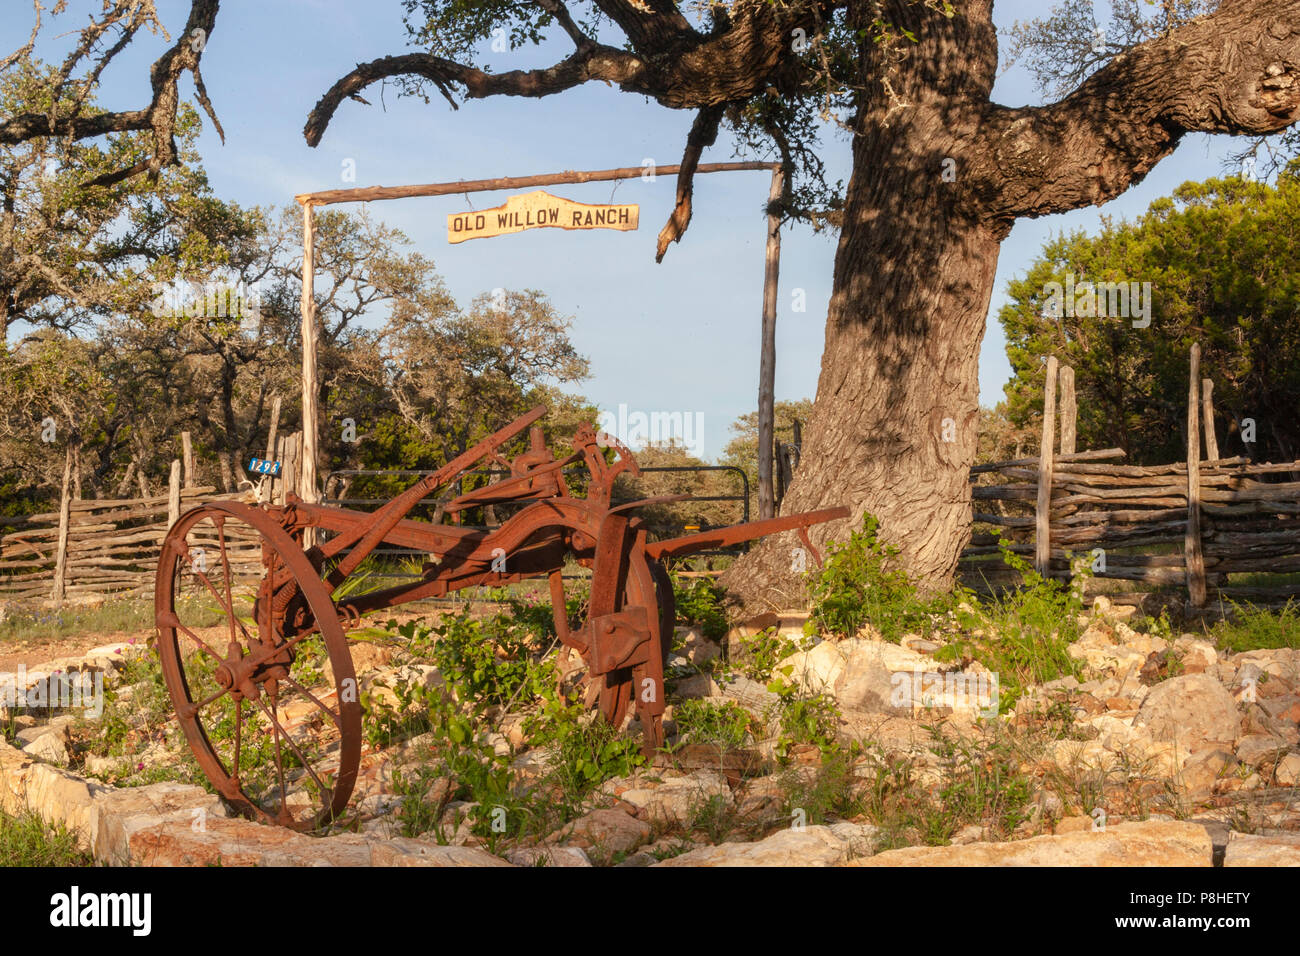 Ingresso all'Old Willow Ranch nel Texas centrale. Foto Stock